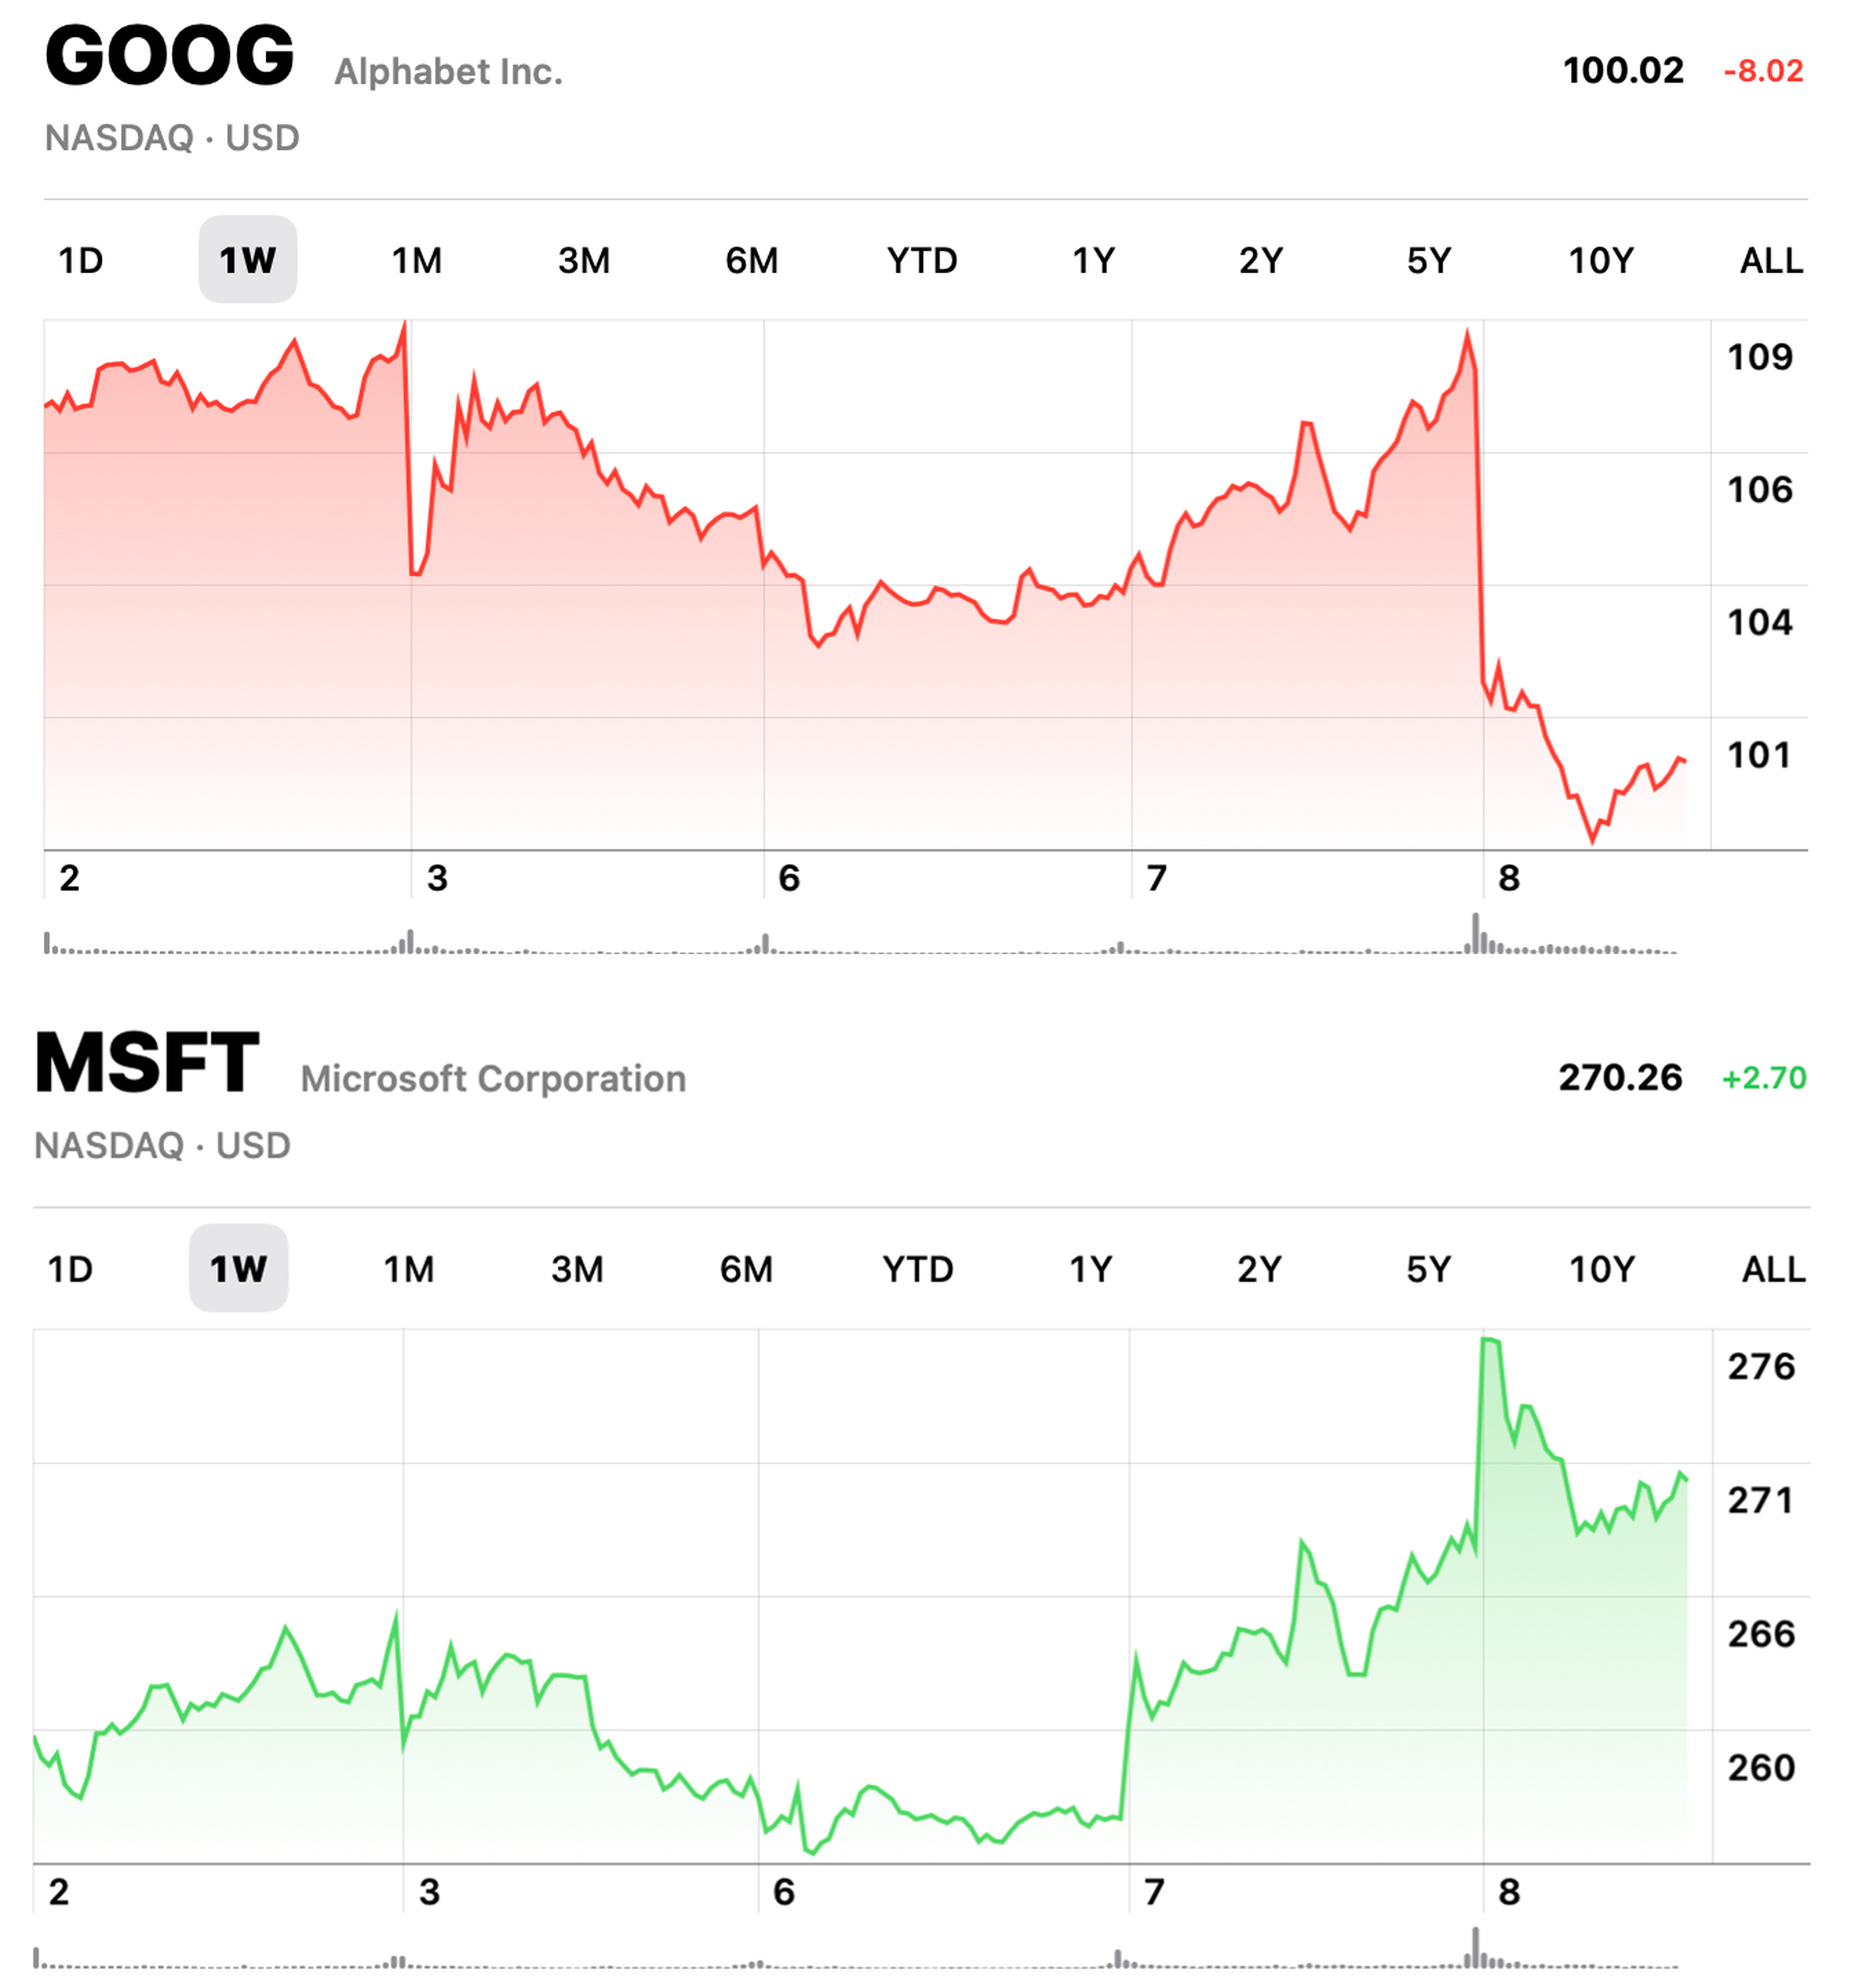 Image of two stock charts. The top, Google’s, shows a large drop on the 8th. The bottom, Microsoft’s, shows the line starting to climb on the 7th.